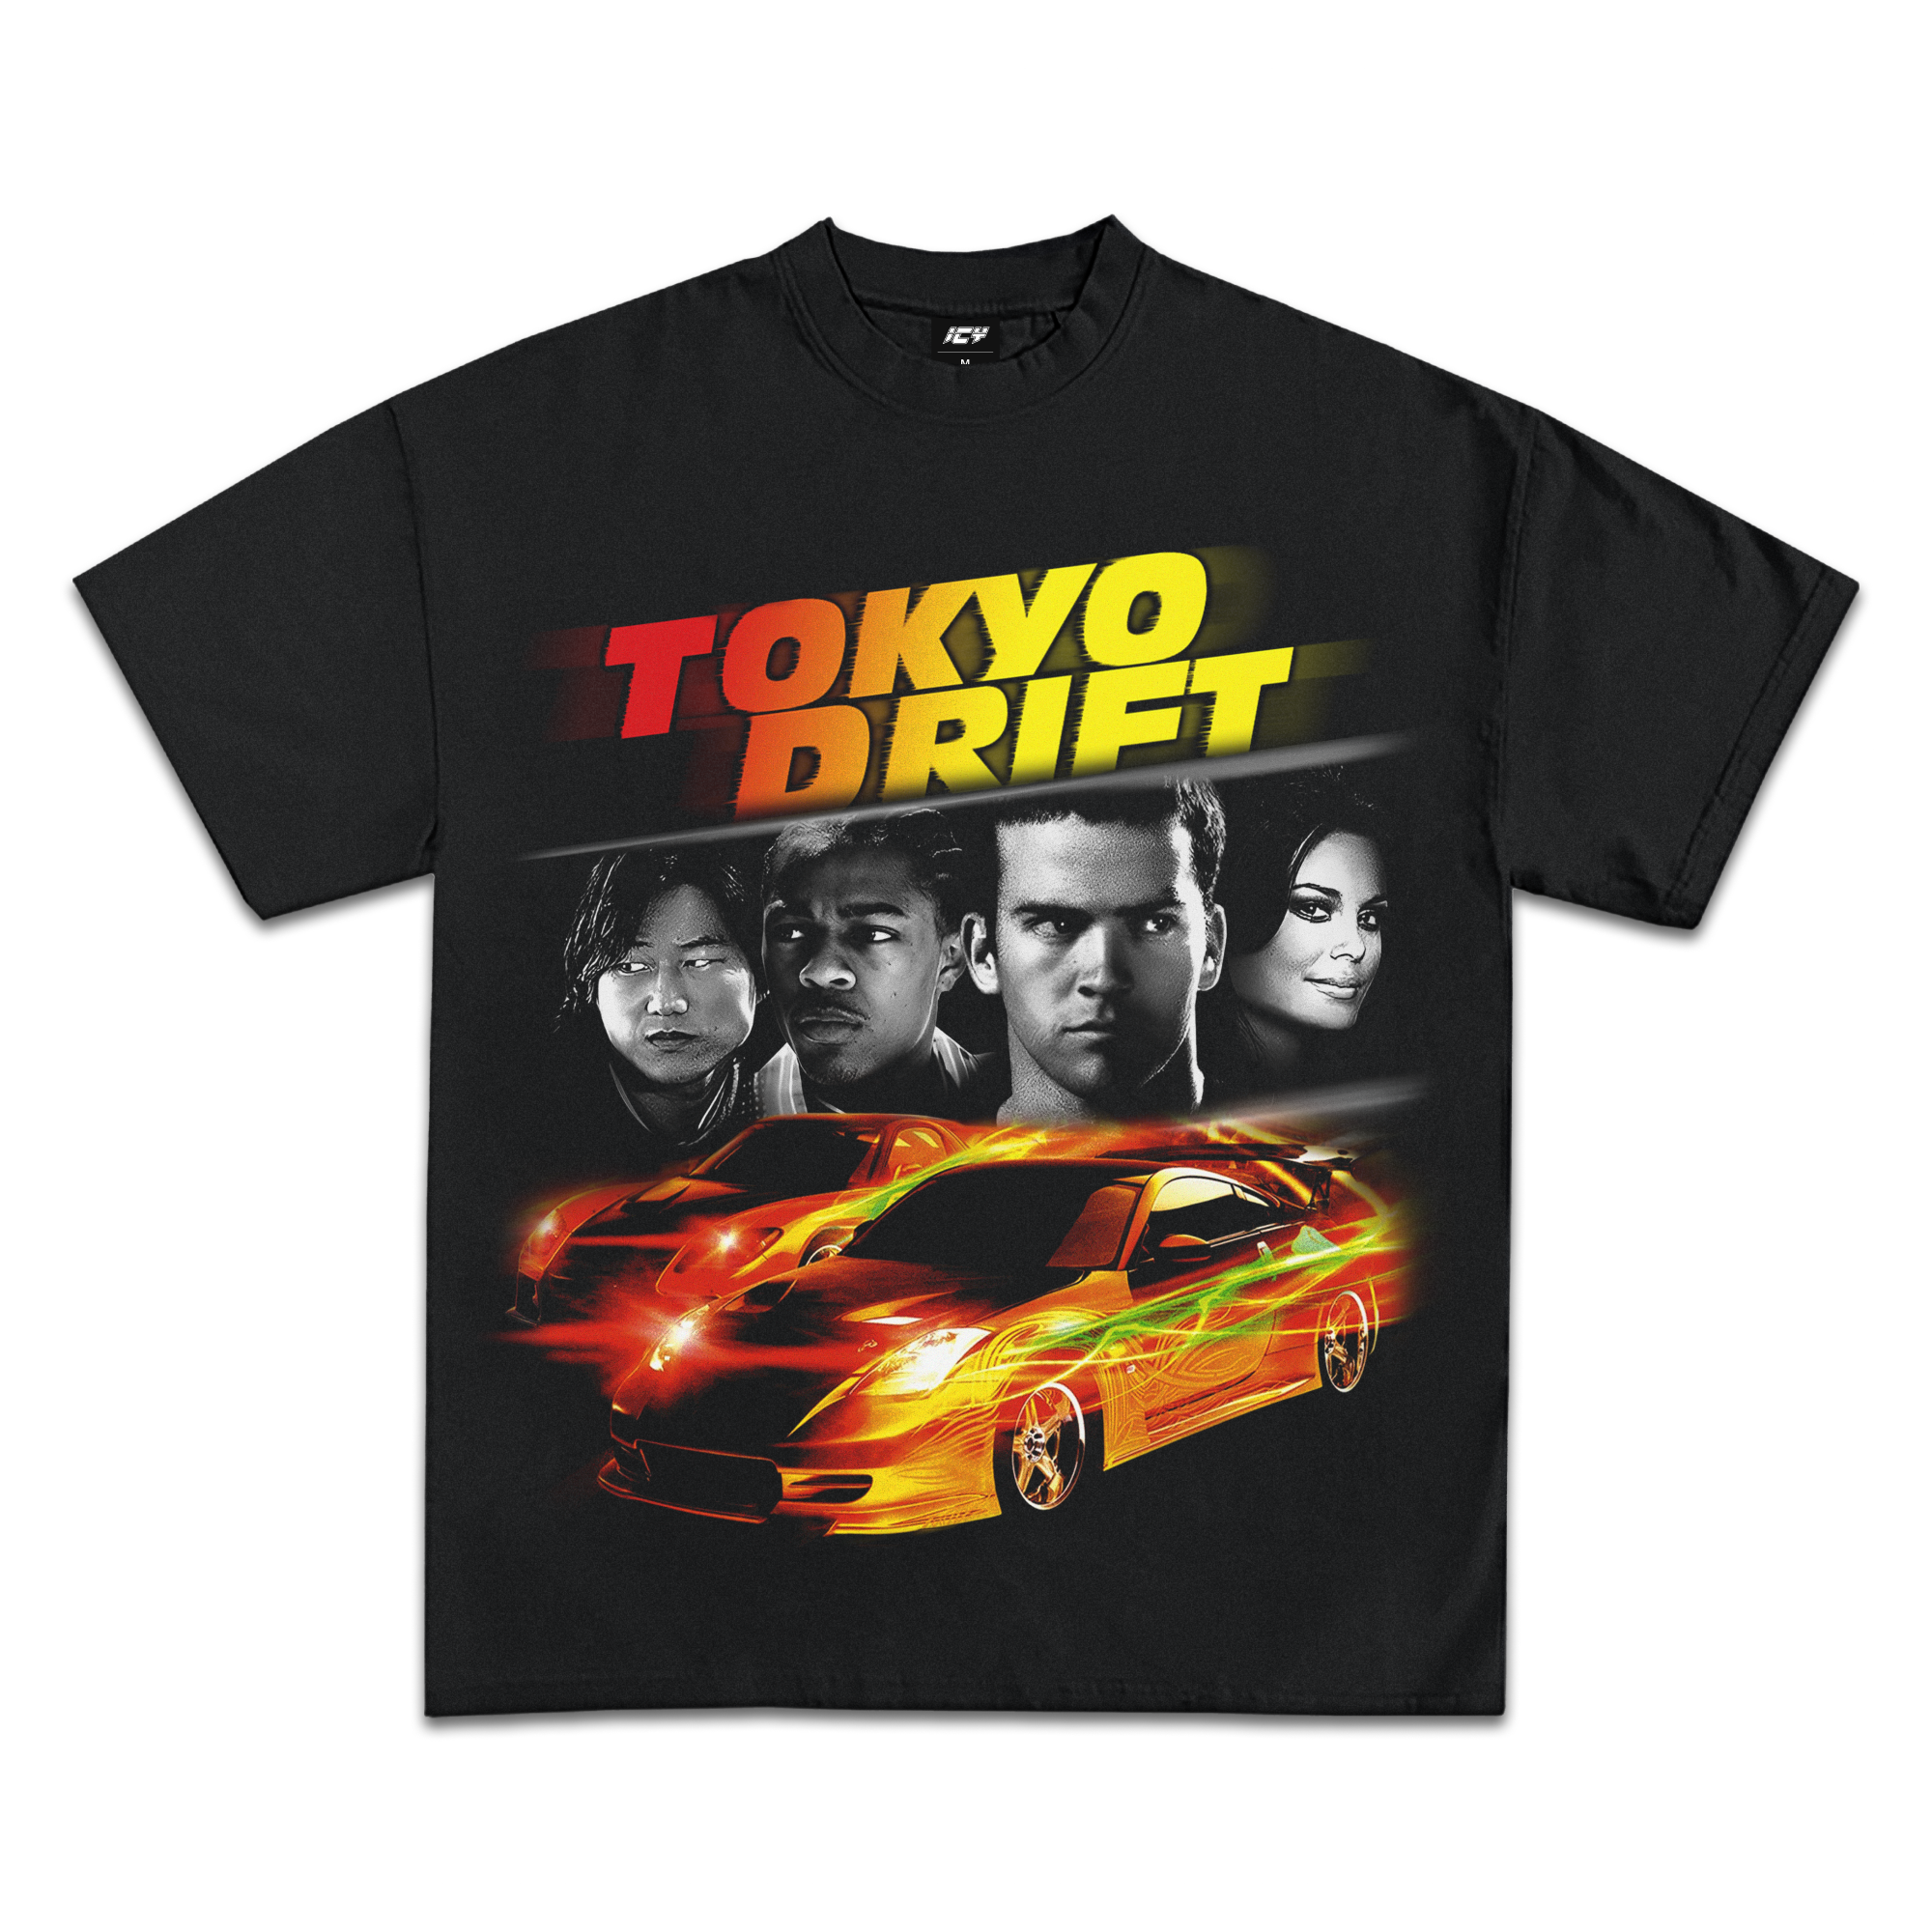 The Fast and Furious Tokyo Drift Graphic T-Shirt